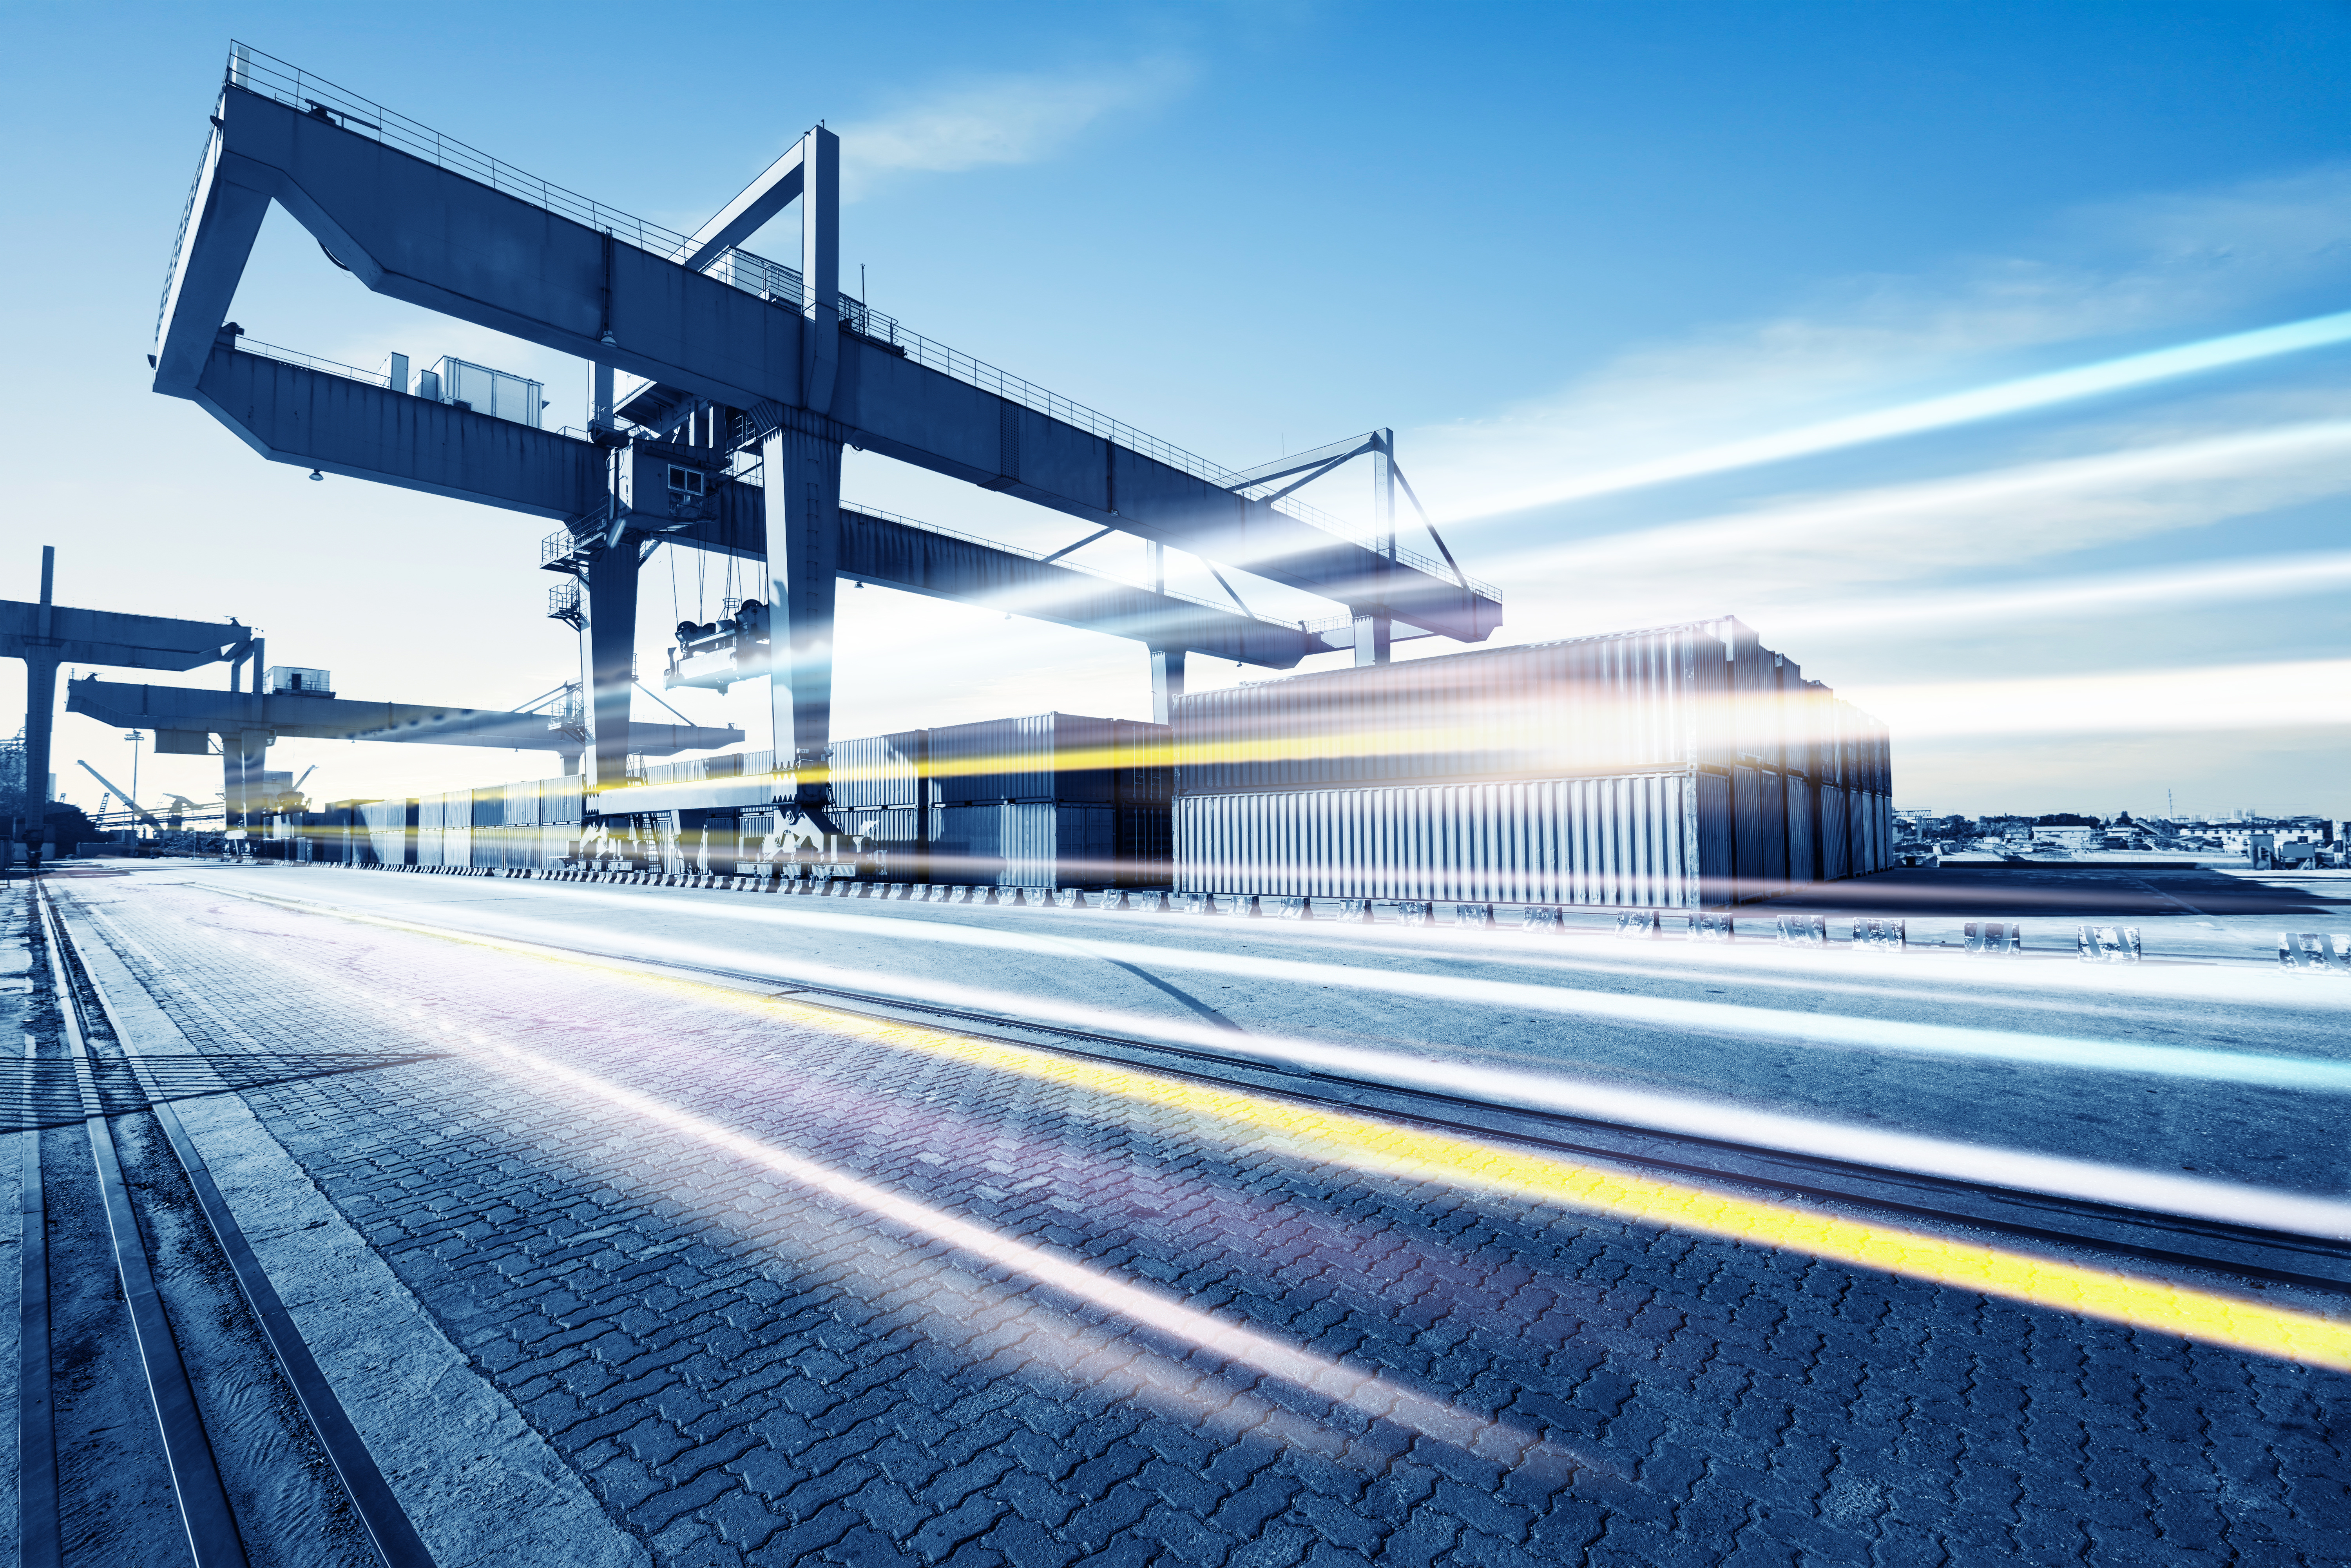 INTERMODAL NEWS & UPDATES IMPACTING YOUR BUSINESS TODAY - Sep 24, 2021